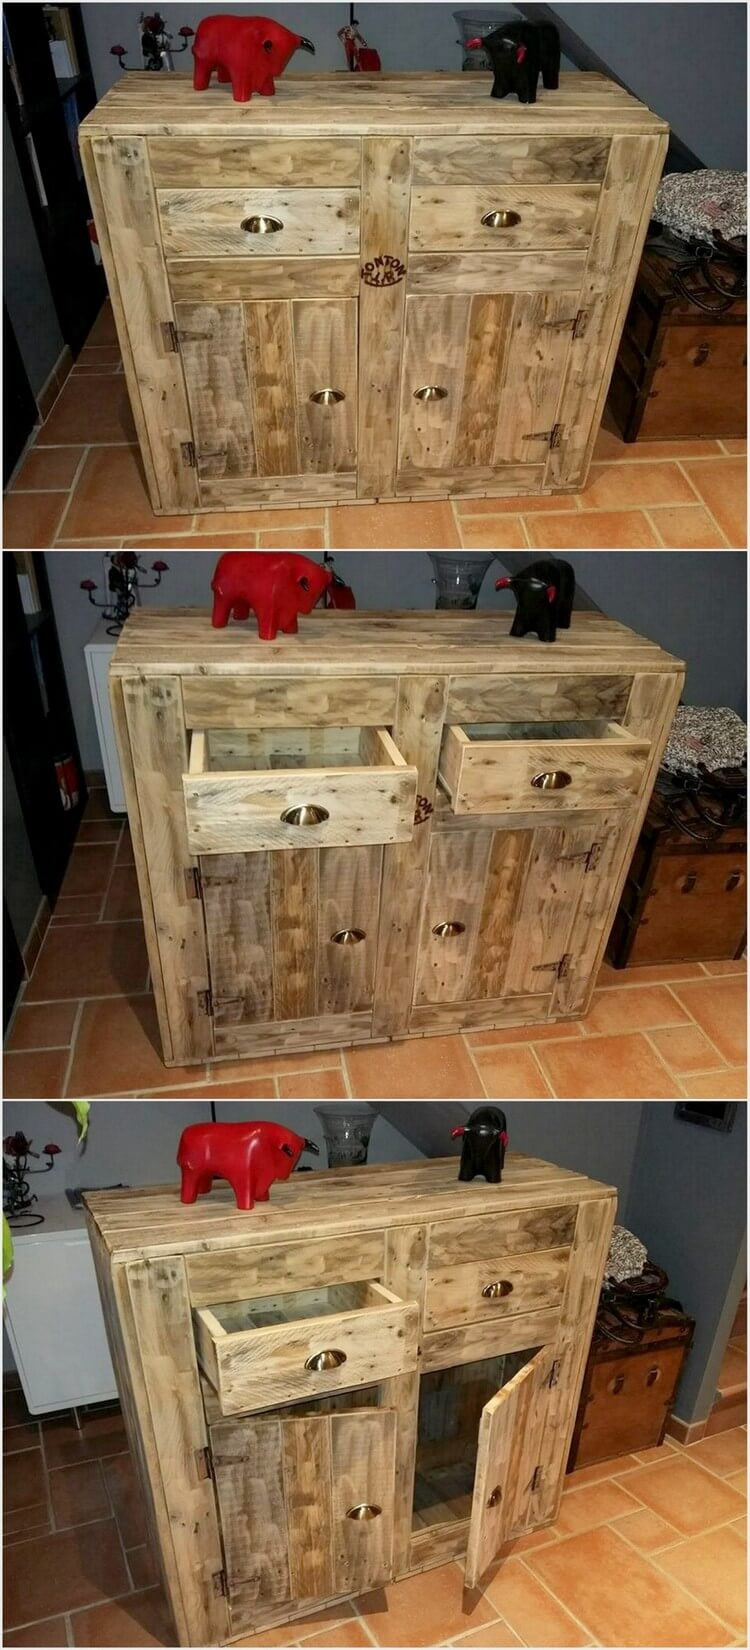 DIY With Wooden Pallets
 50 Inspiring DIY Ideas with Wooden Pallets